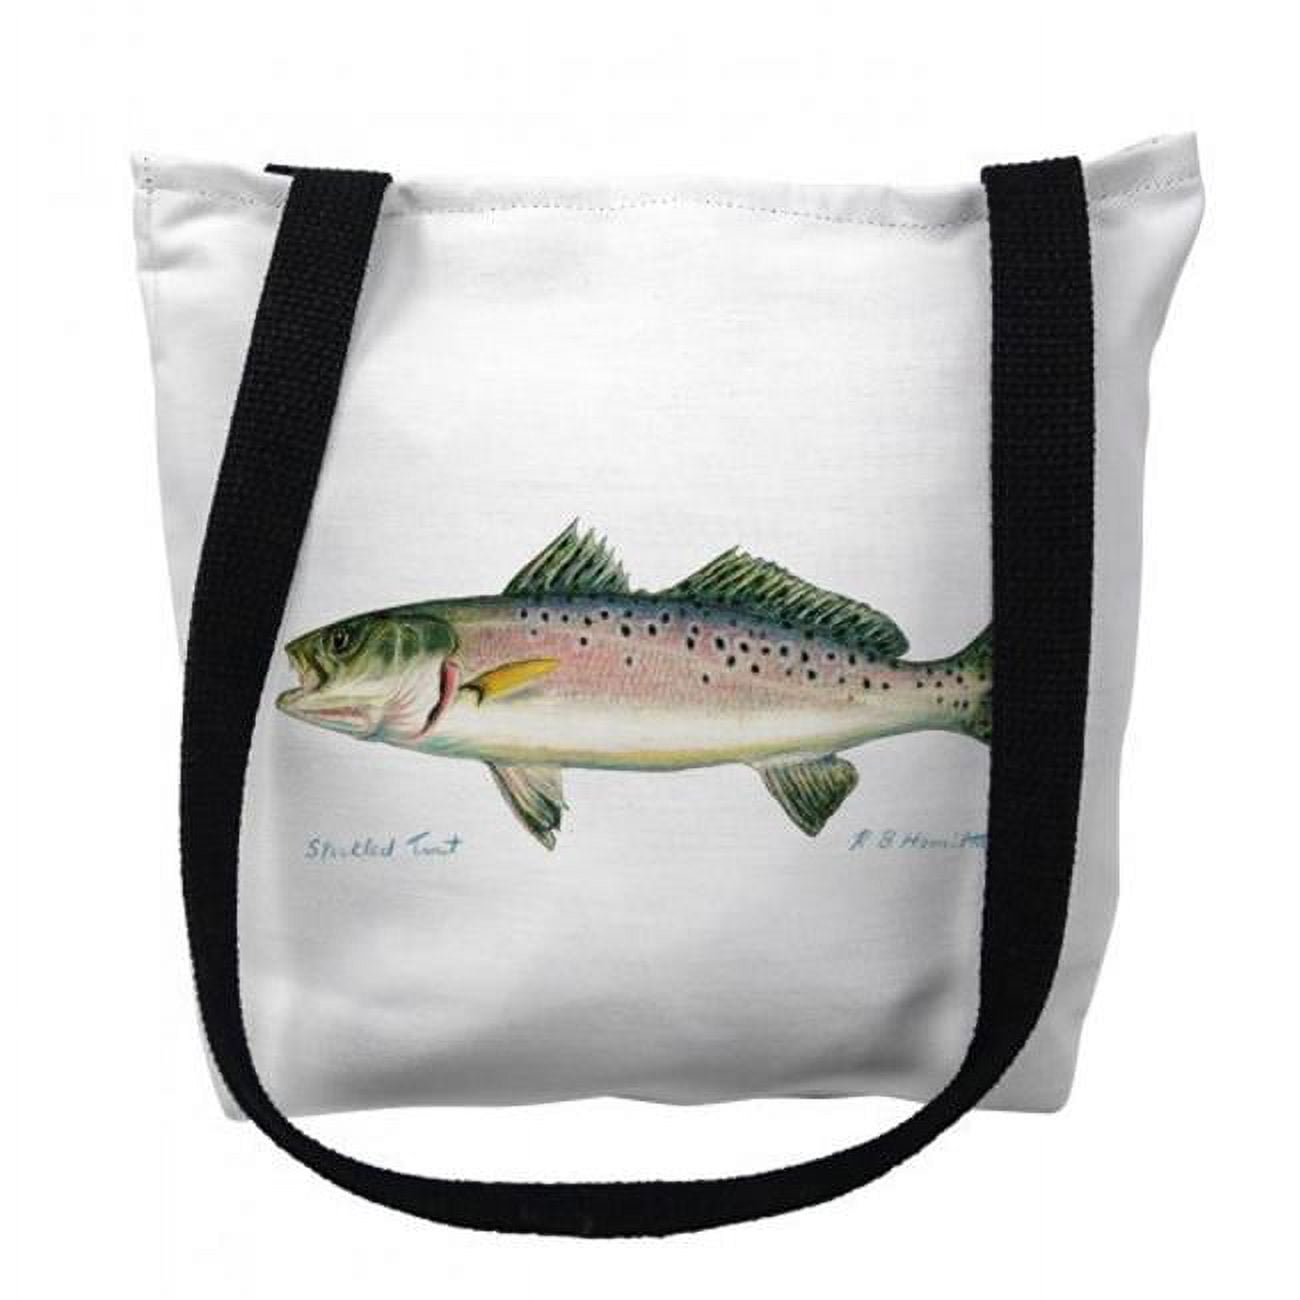 Ty023lm 16 X 16 In. Speckled Trout Left Tote Bag - Medium